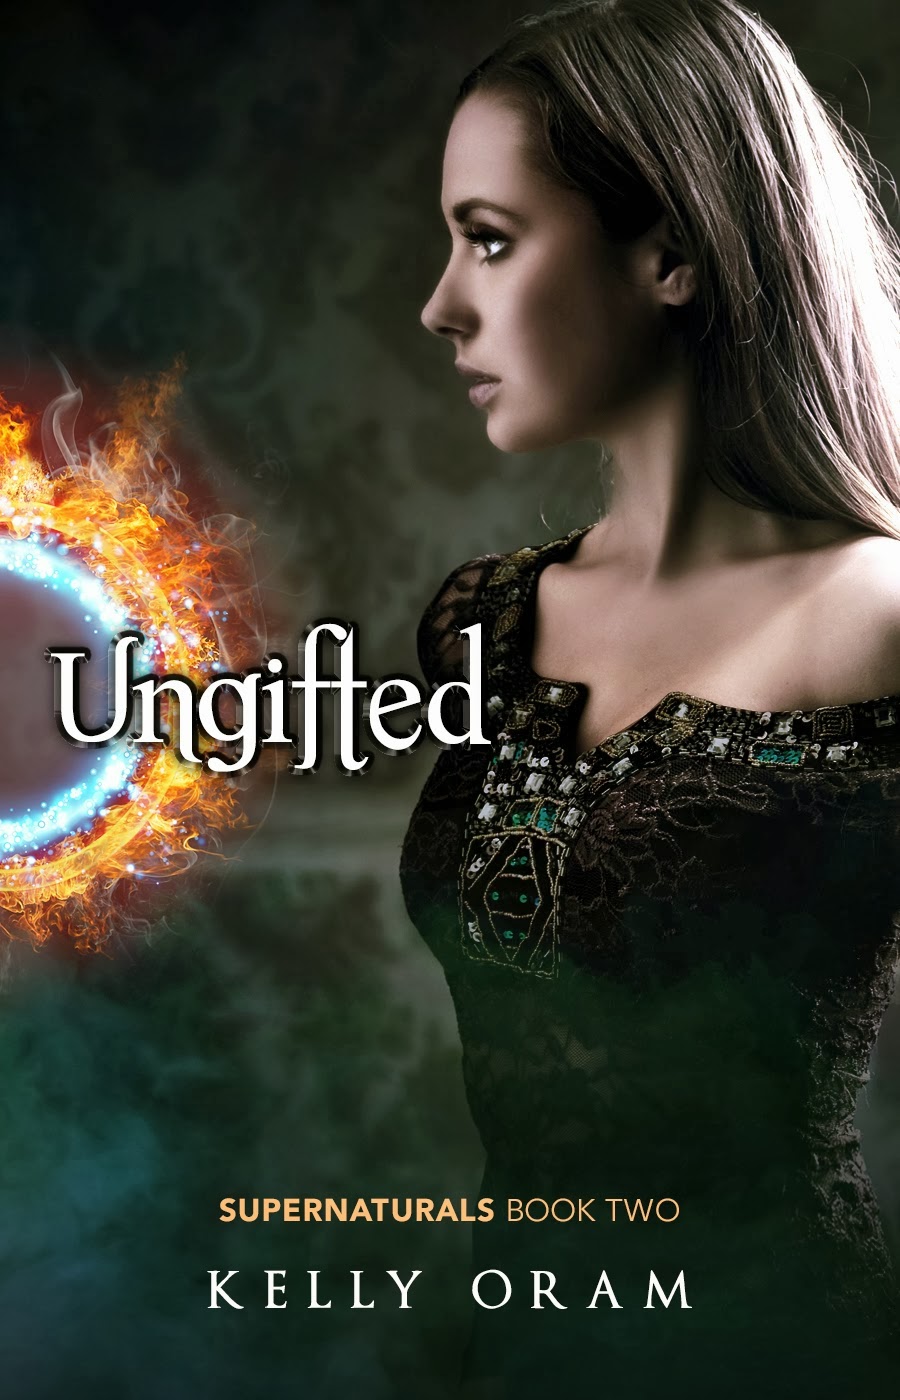 http://www.shedreamsinfiction.com/2014/02/blog-tour-review-ungifted-by-kelly-oram.html